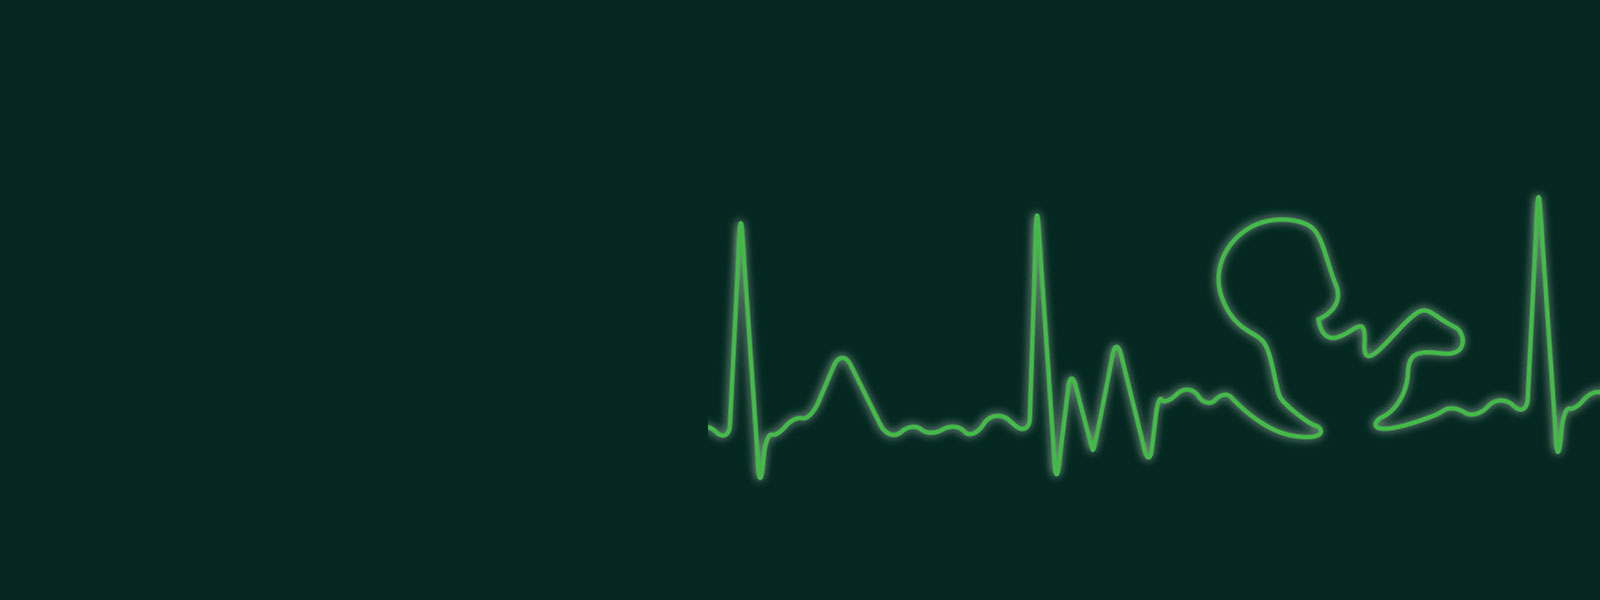 Illustration of a heart monitor graph